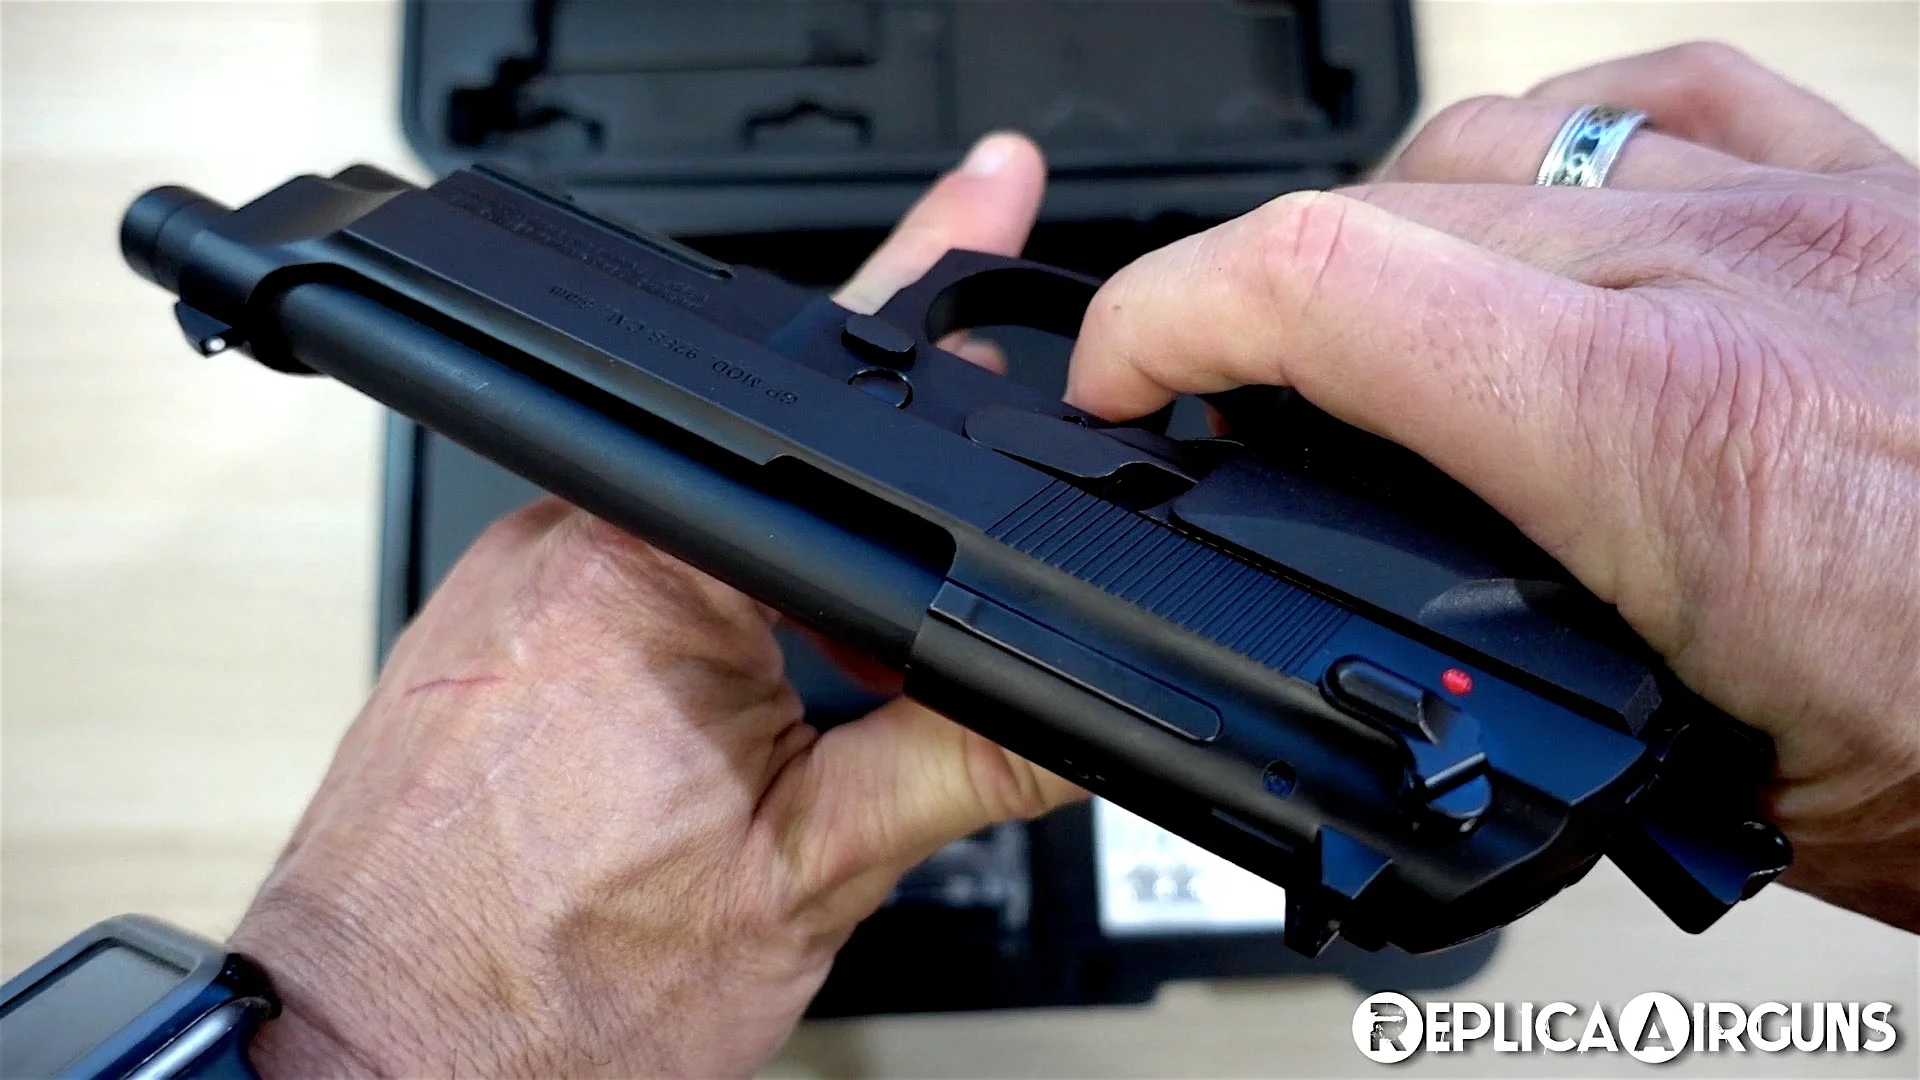 Beretta model 92 FS airsoft spring pistol - review and shooting test 